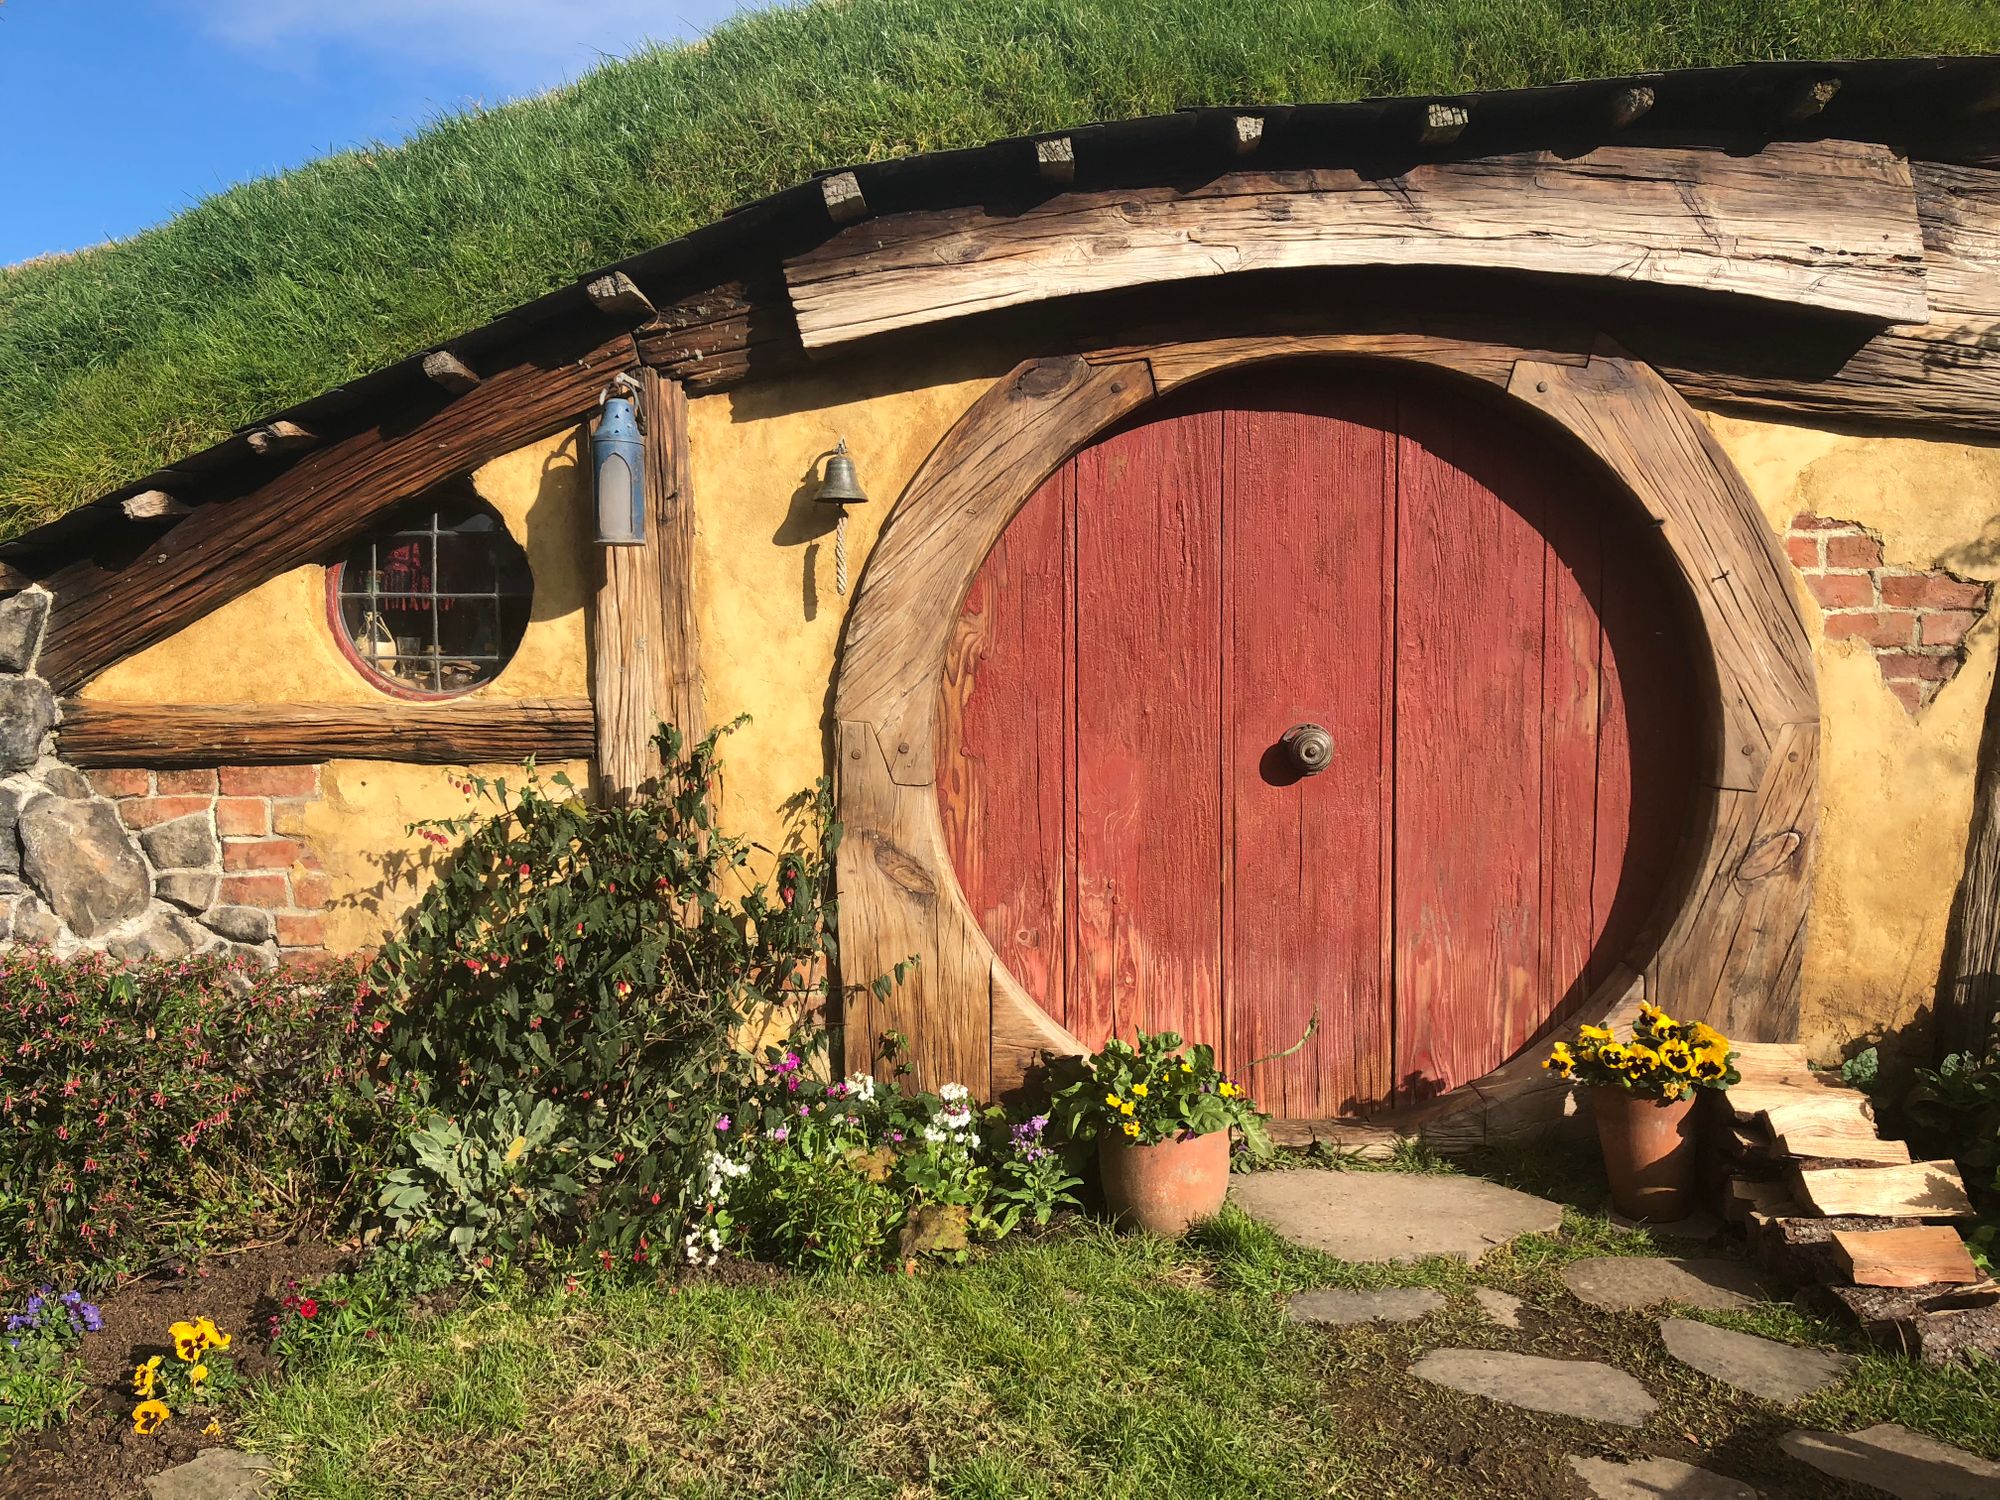 Hobbiton - A Day in the Shire